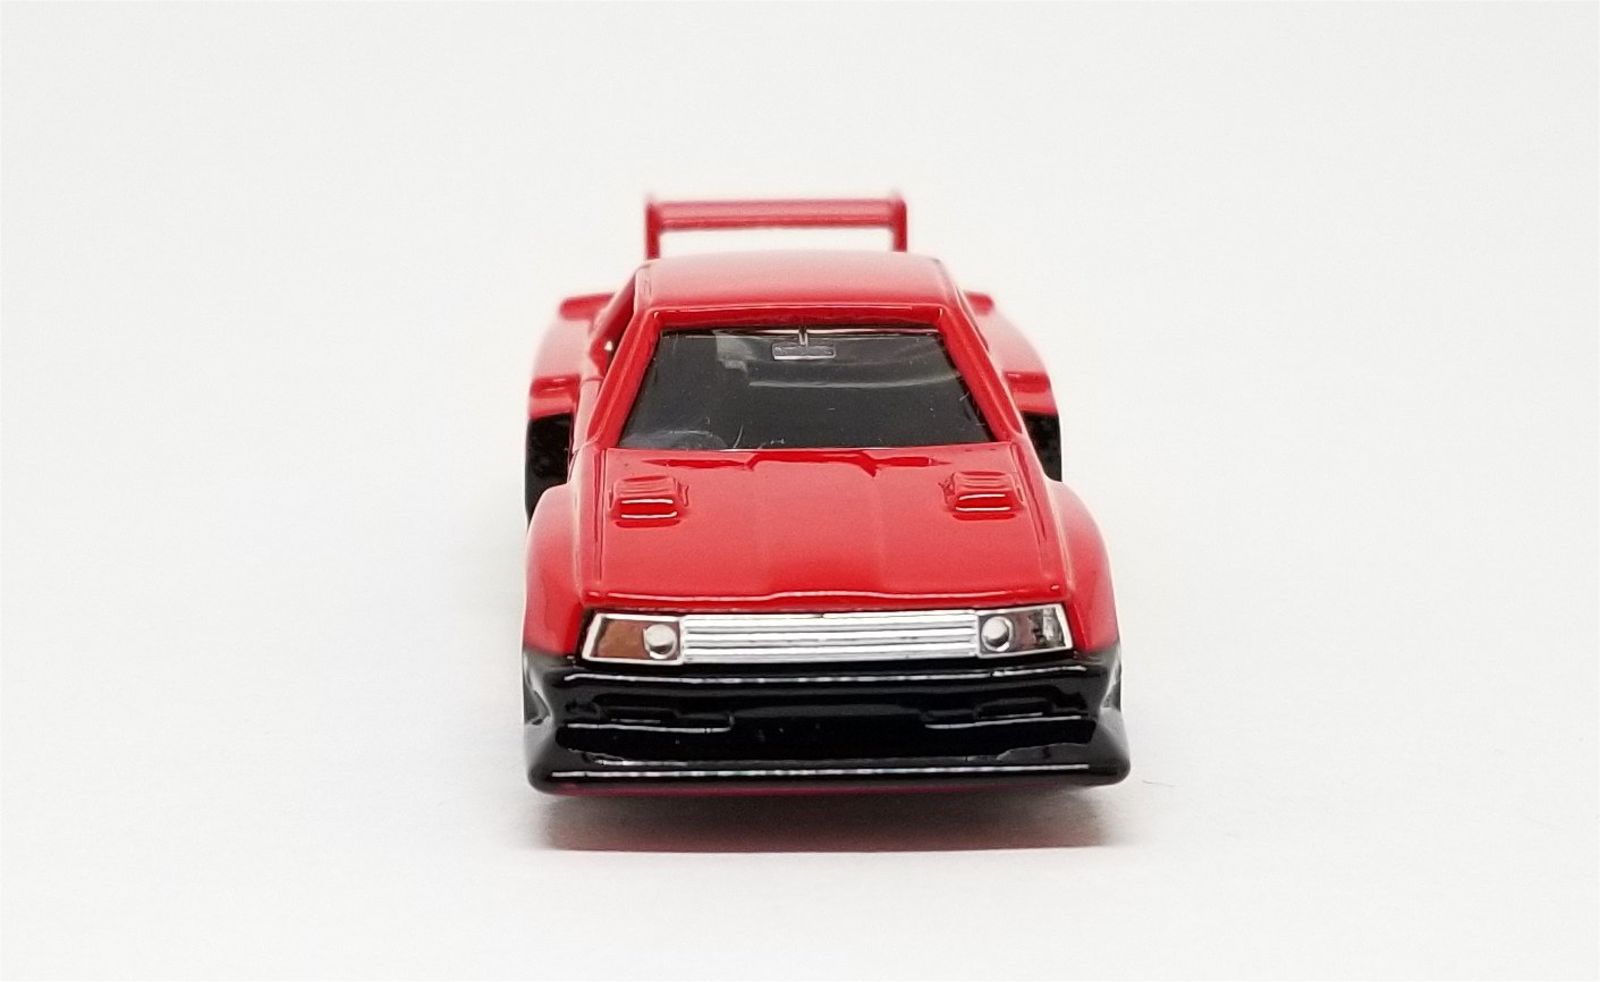 Illustration for article titled [REVIEW] Tomica Nissan Skyline Silhouette Formula